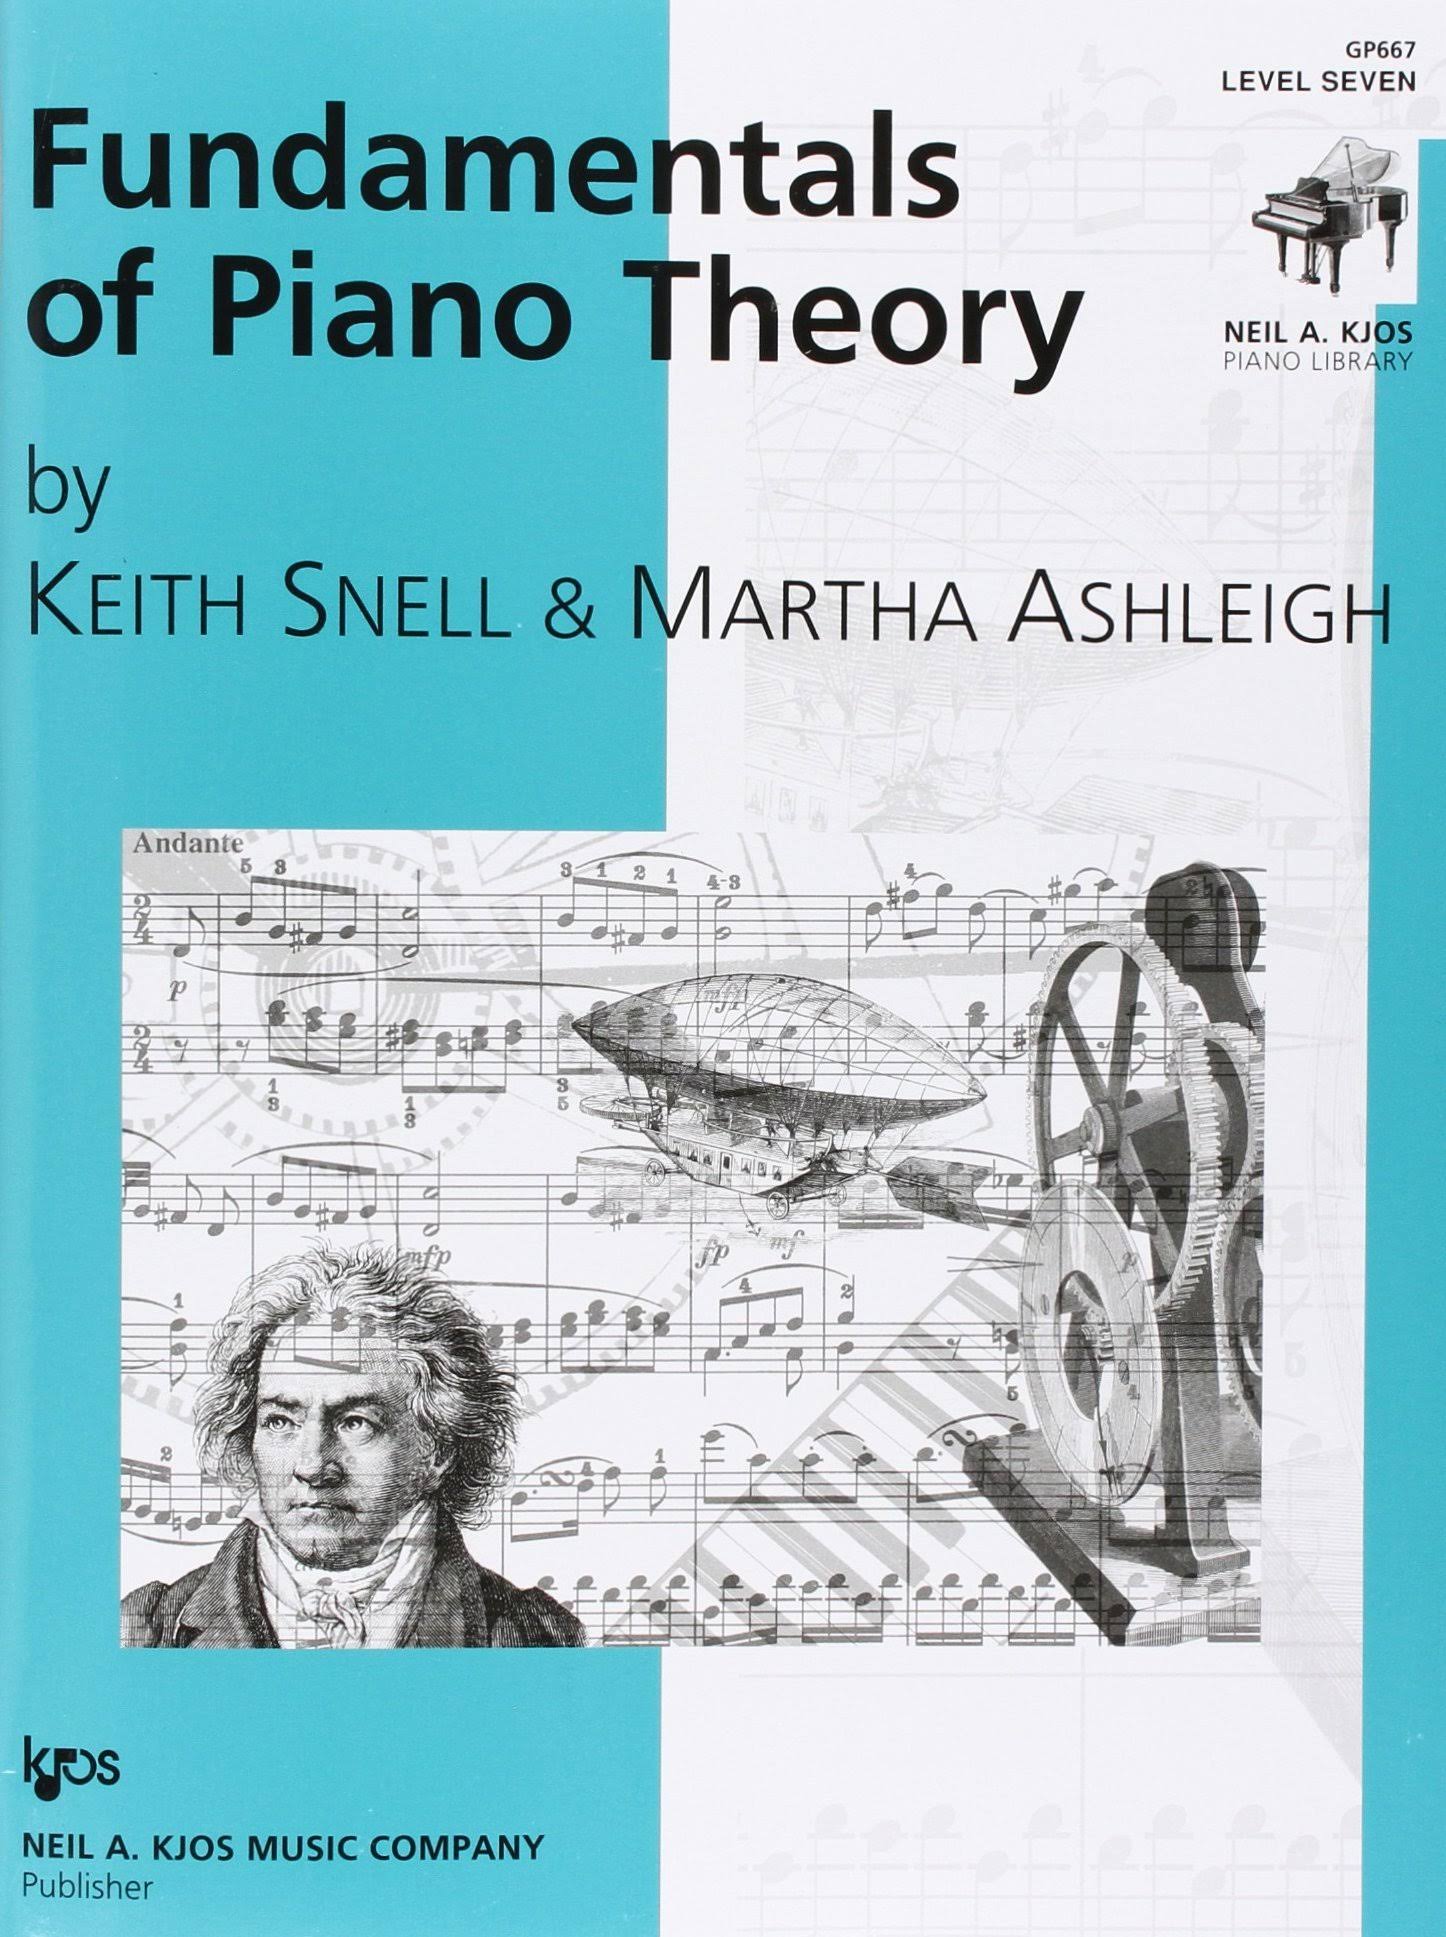 Fundamentals of Piano Theory Level 7 - Keith Snell